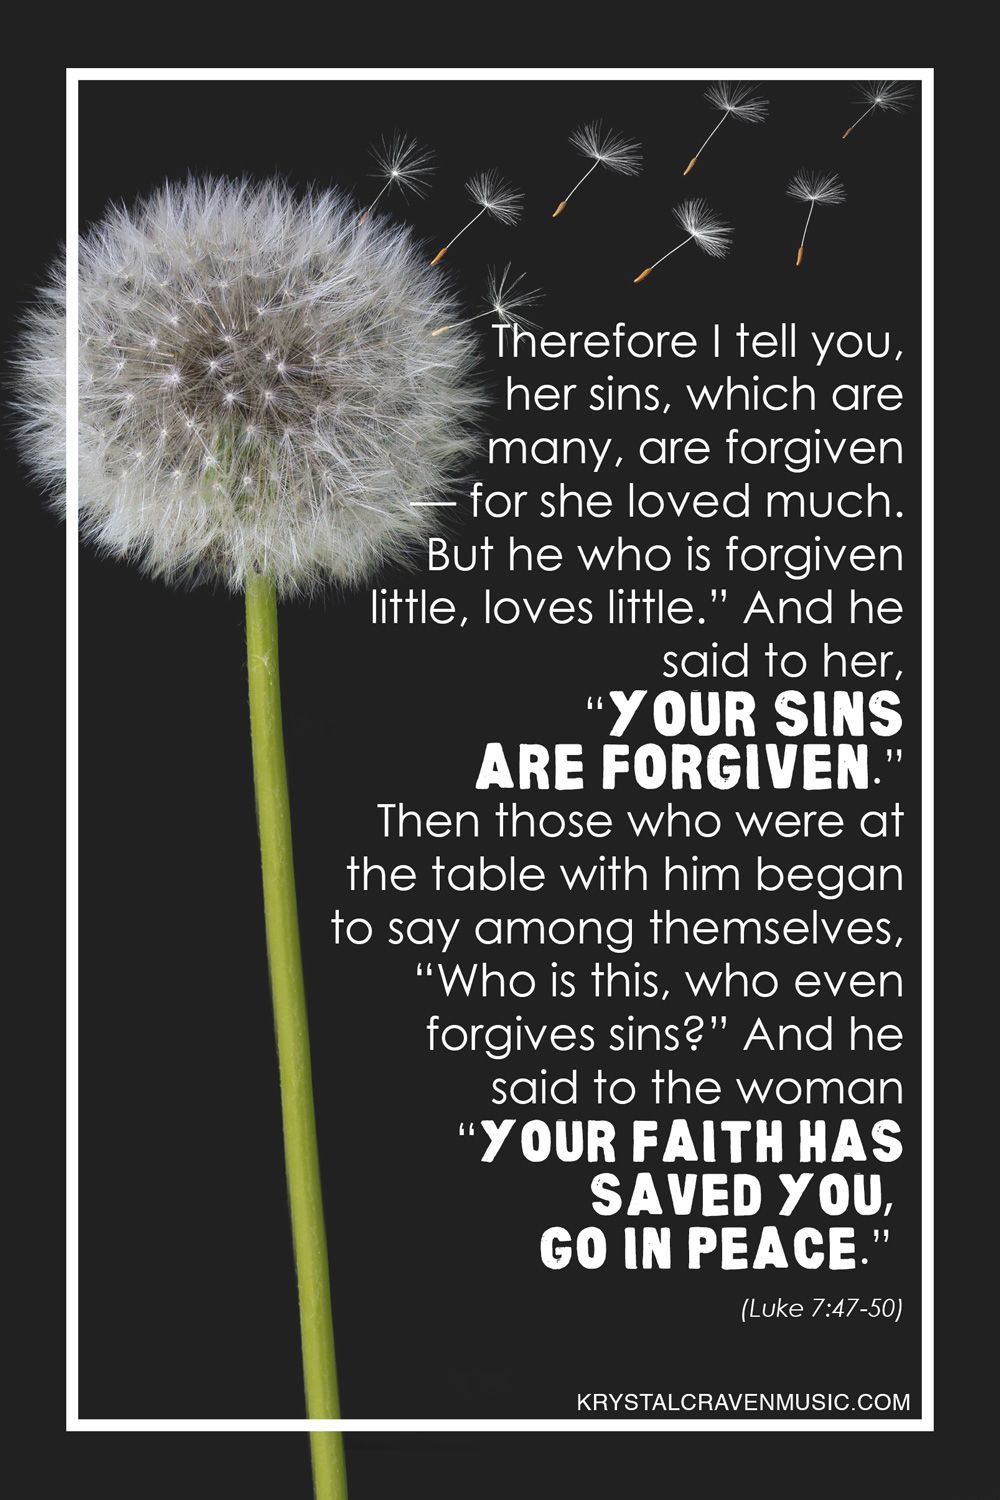 The text of Luke 7:47-50 "Therefore I tell you, her sins, which are many, are forgiven - for she loved much. But he who is forgiven little, loves little." And he said to her, 'Your sins are forgiven.' Then those who were at the table with him began to say among themselves, 'Who is this, who even forgives sins?' And he said to the woman 'Your faith has saved you, go in peace." overlaying a black background with a dandelion flower and several petals of the flower blowing in the wind.